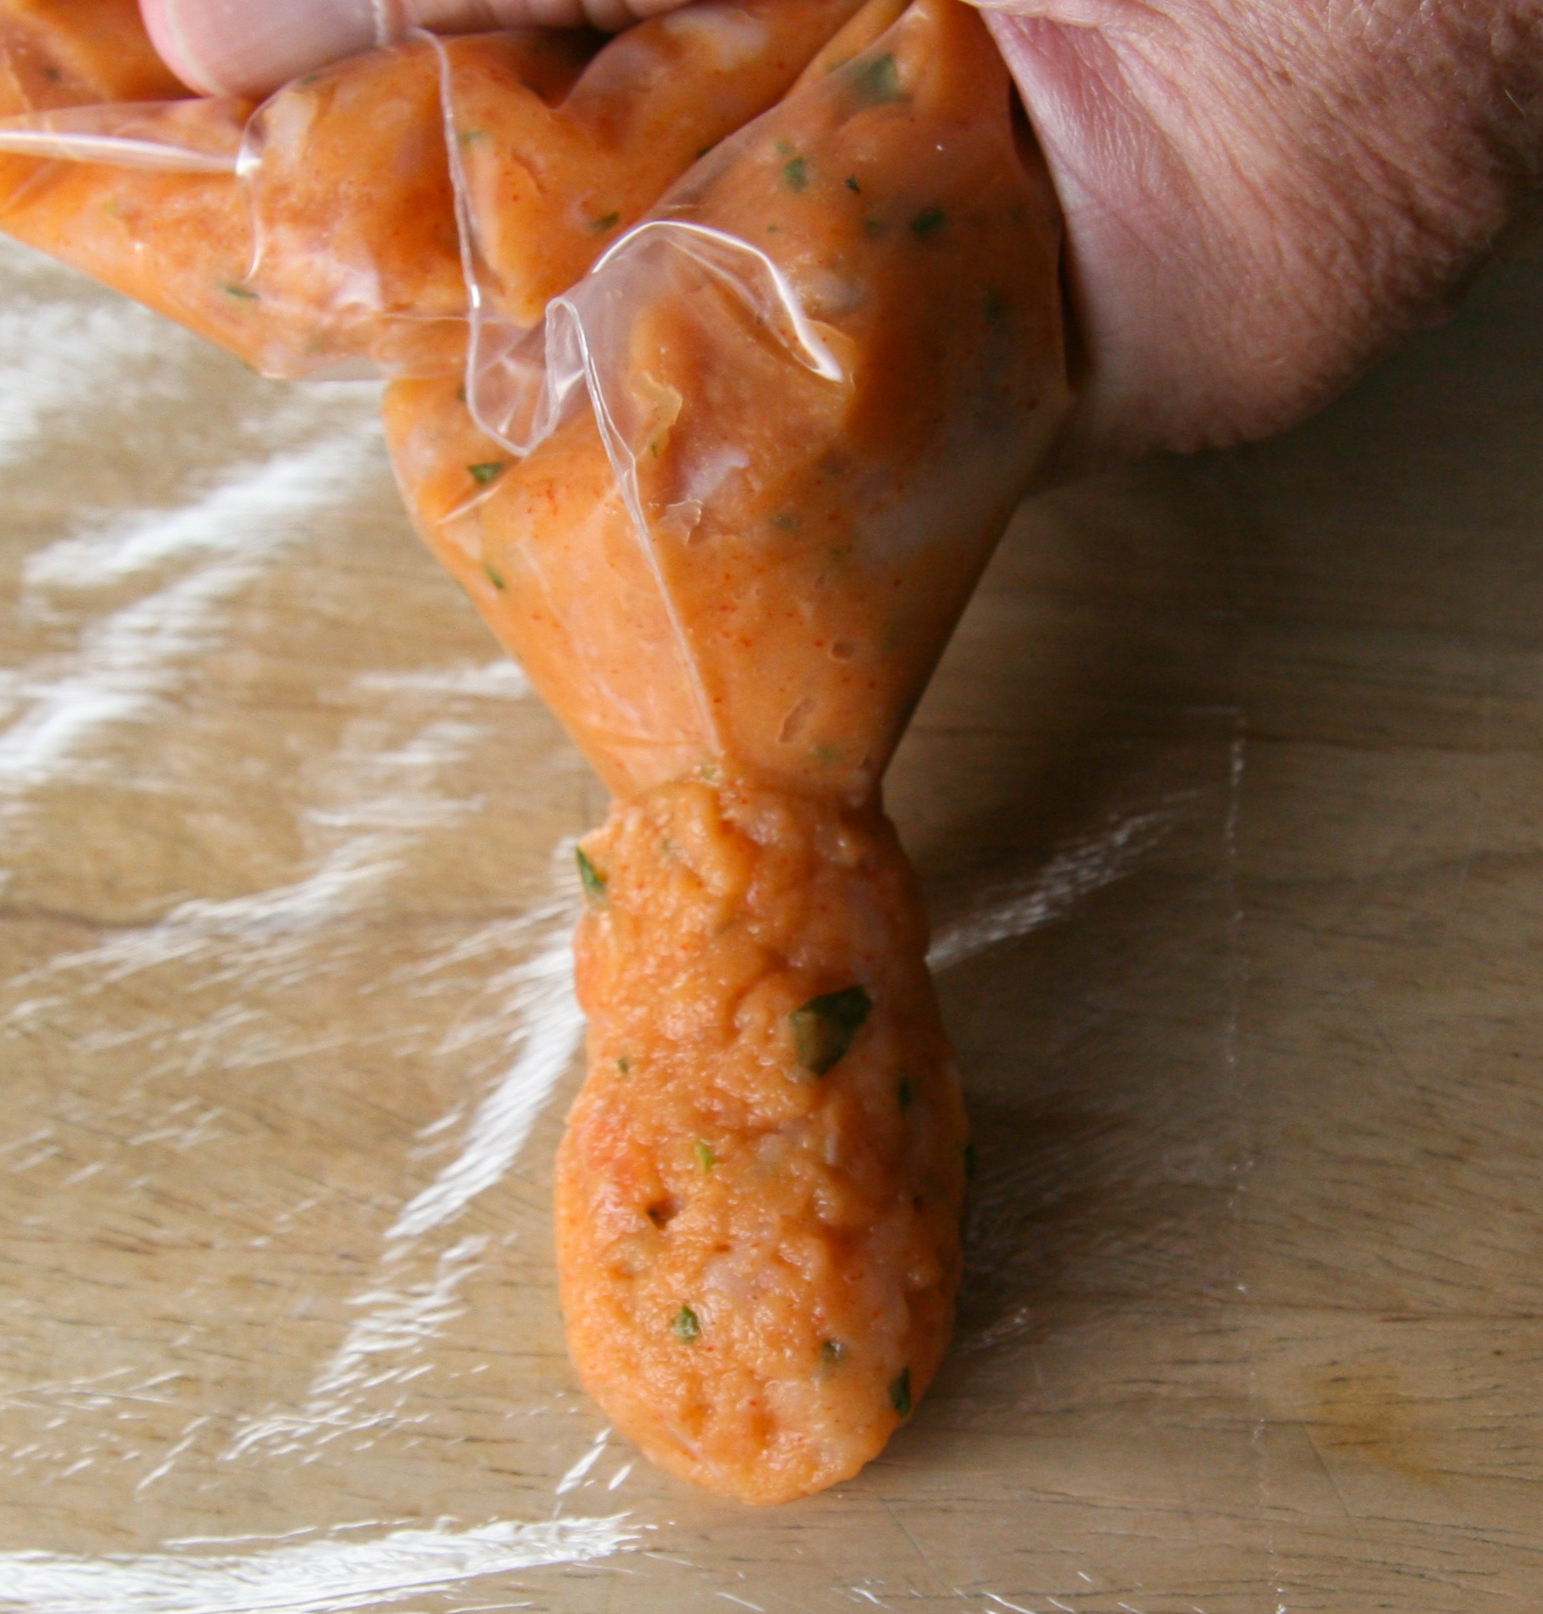 Extruding the sausage mixture onto the plastic wrap